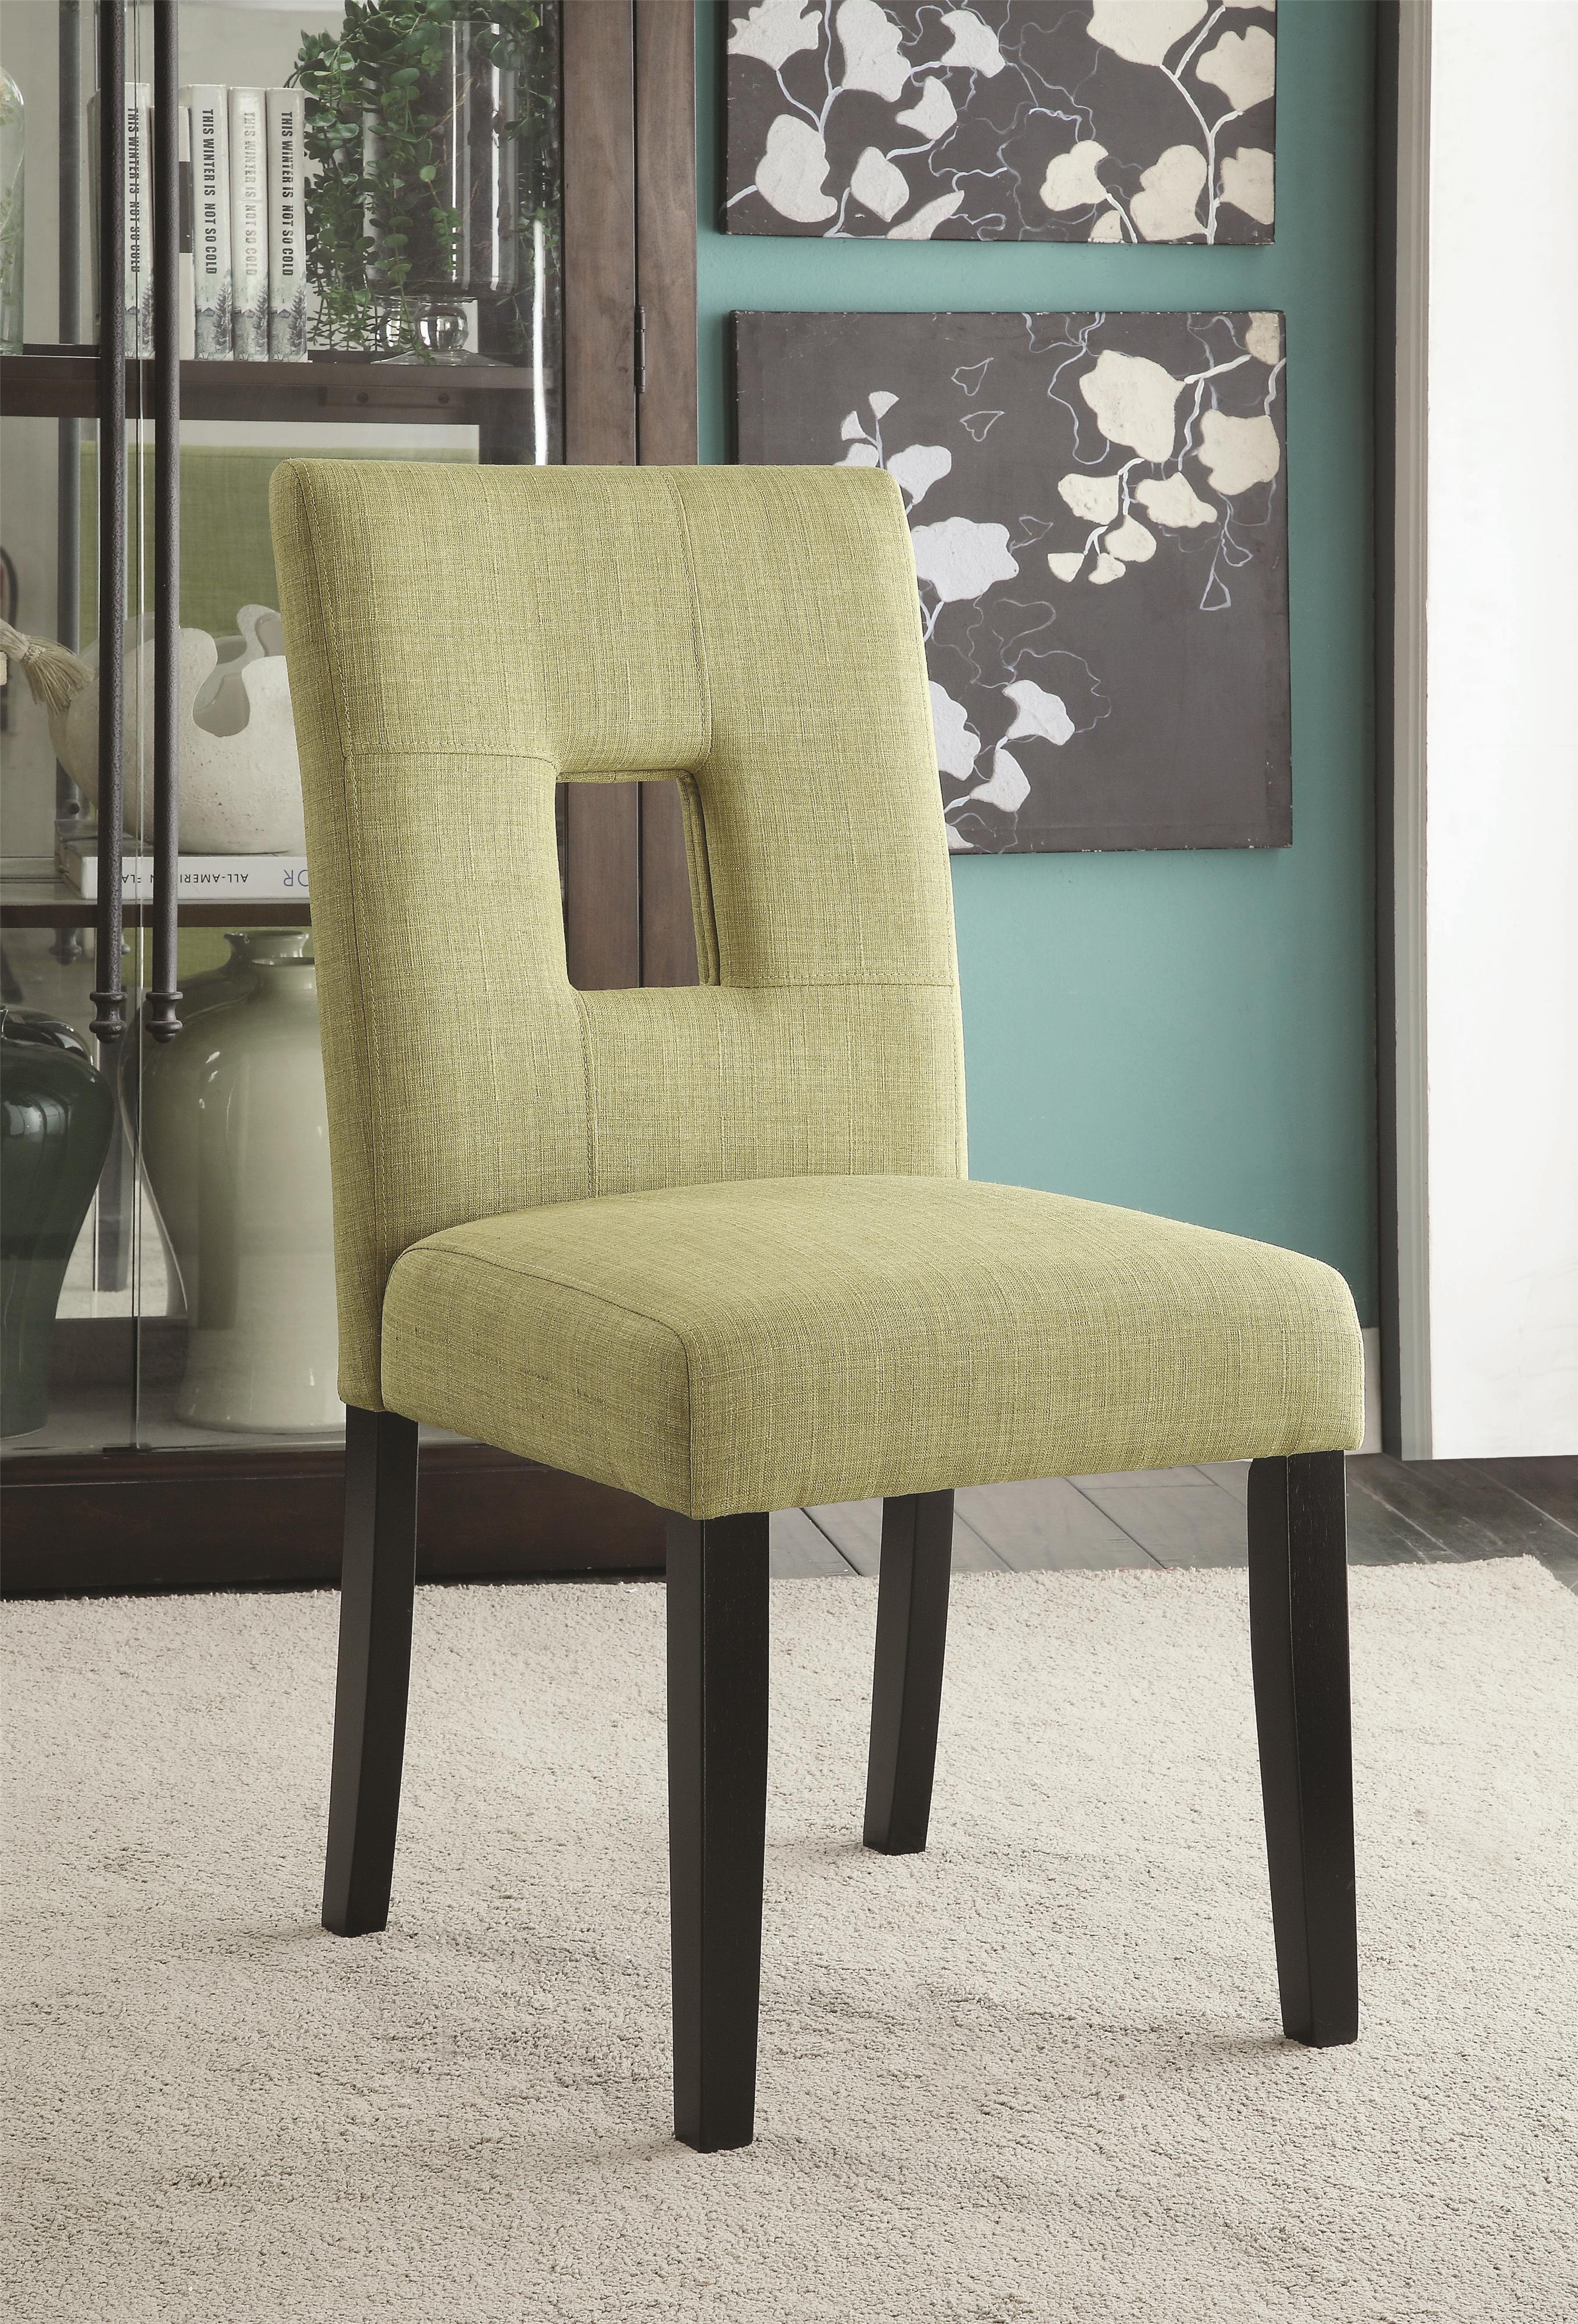 Green Side Chair